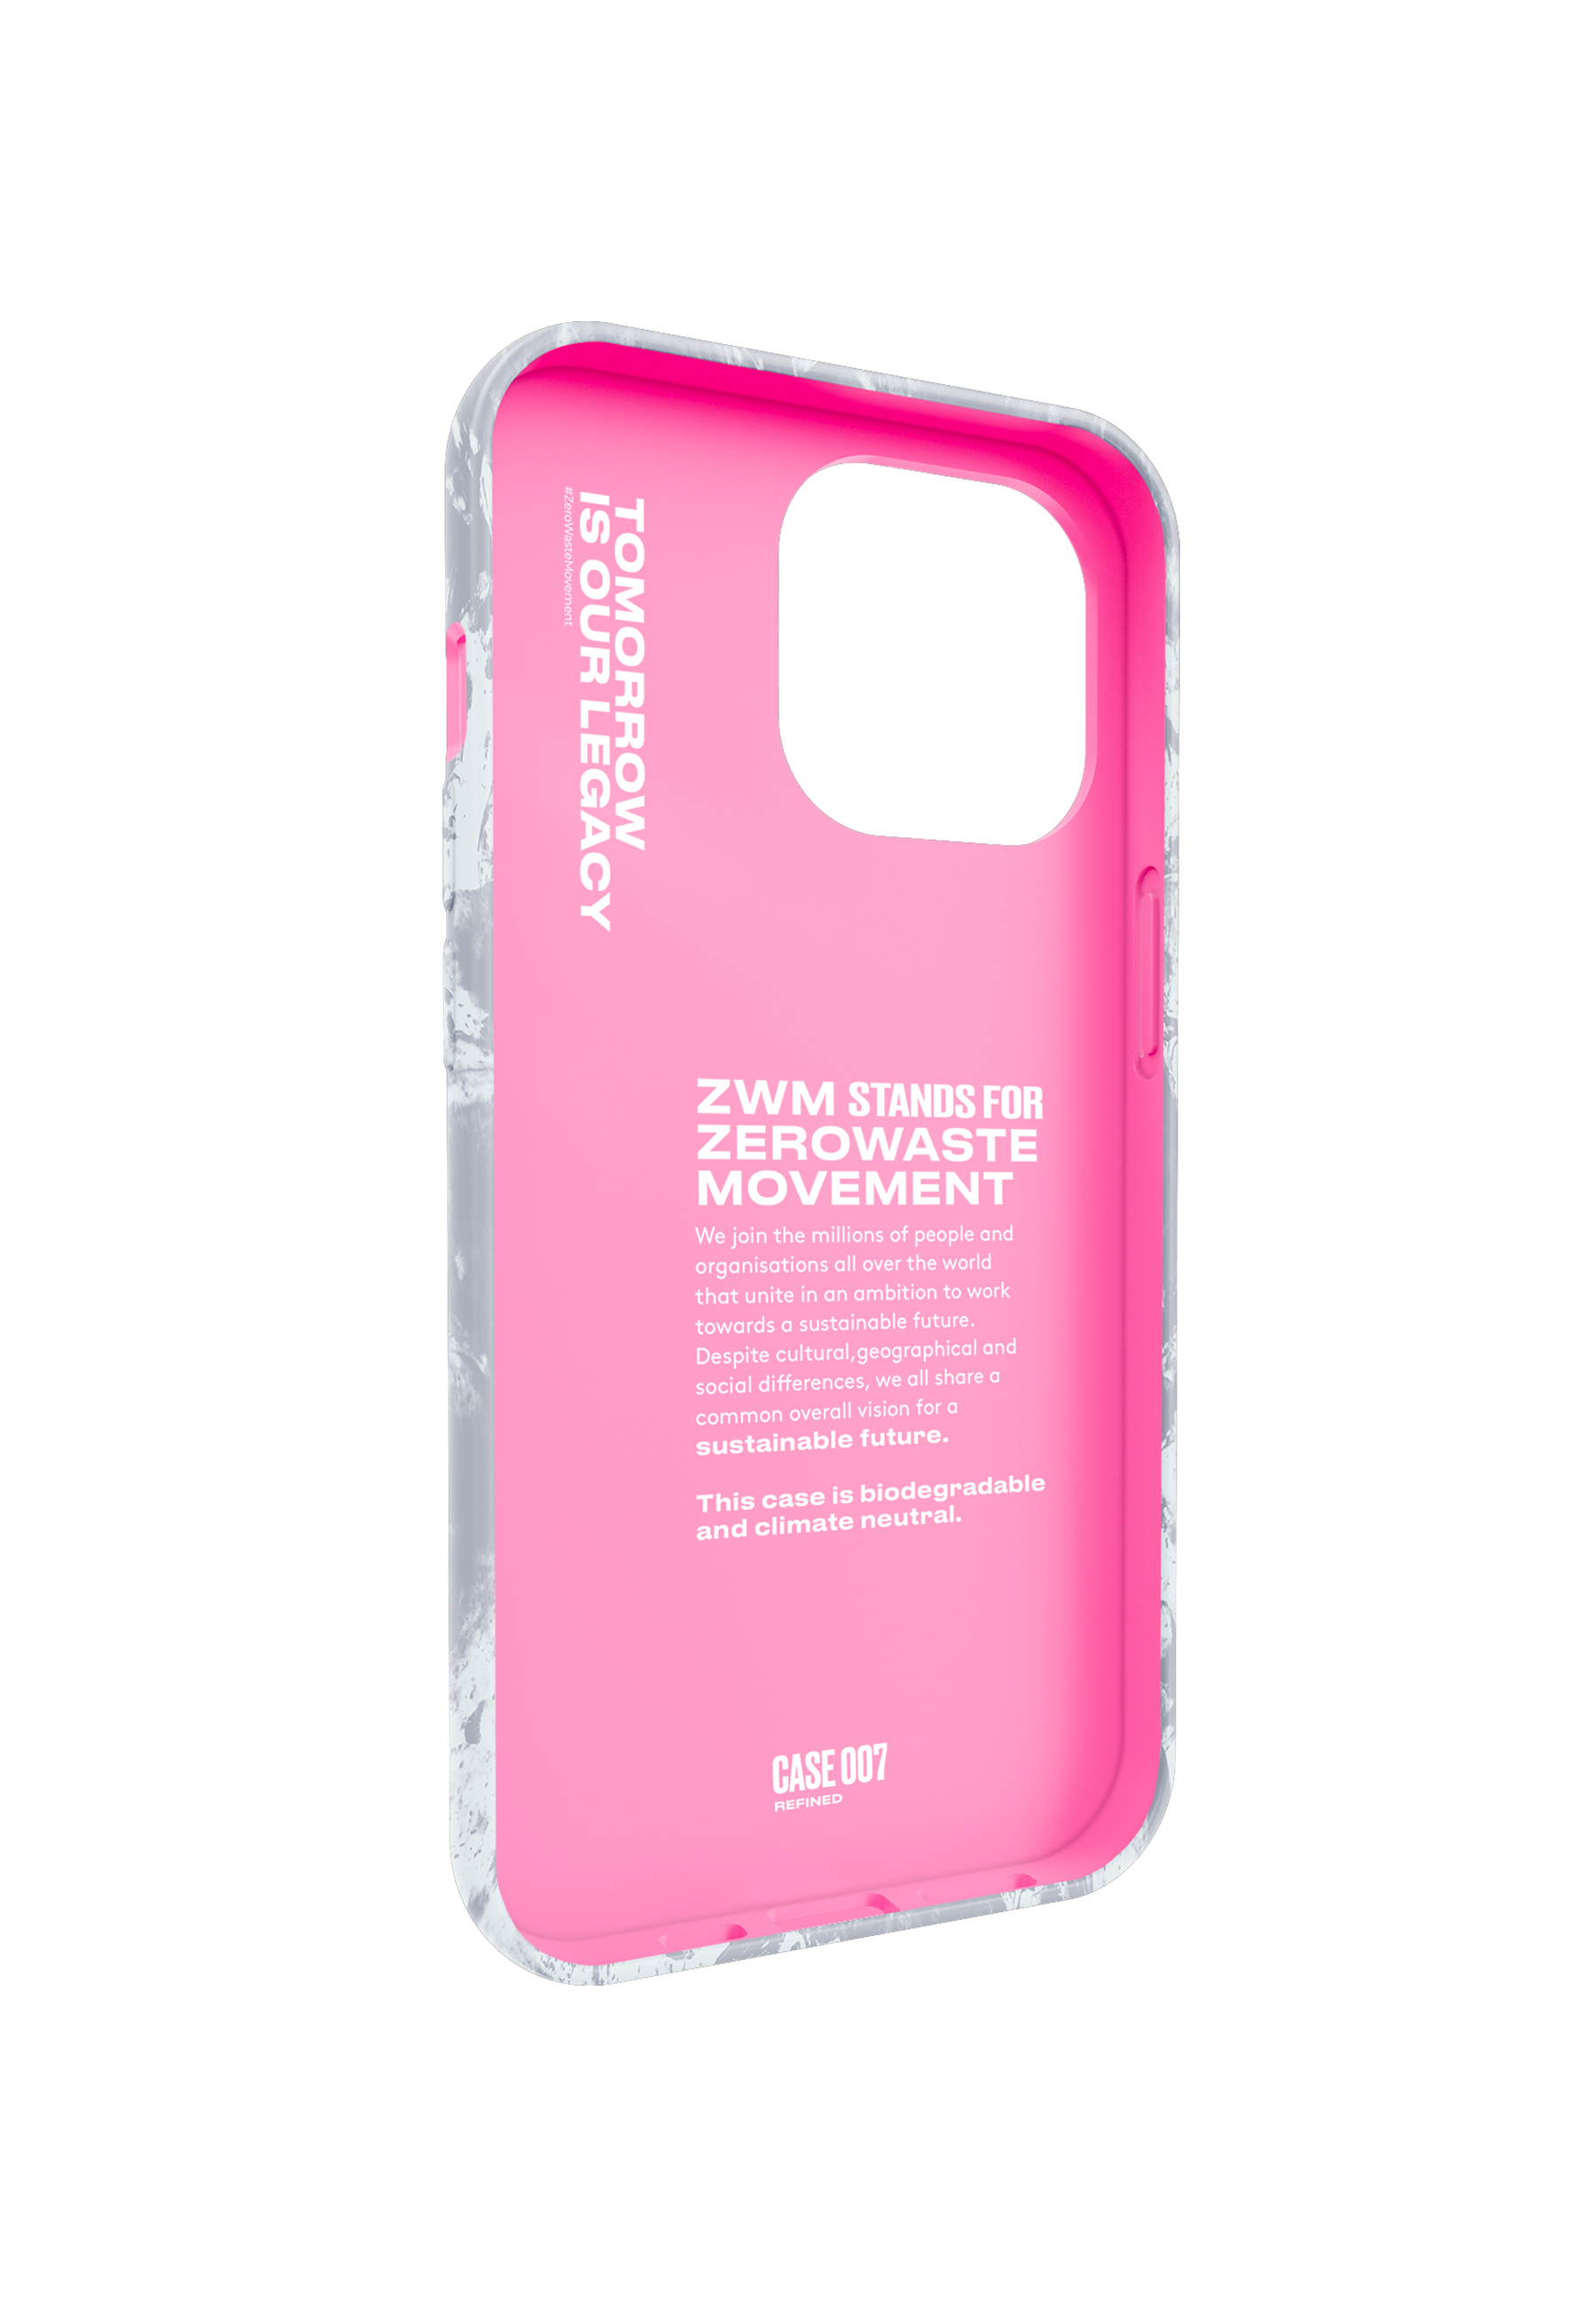 _13PM, iPhone Apple, Pro, 12/12 ZWM Backcover, gray/pink